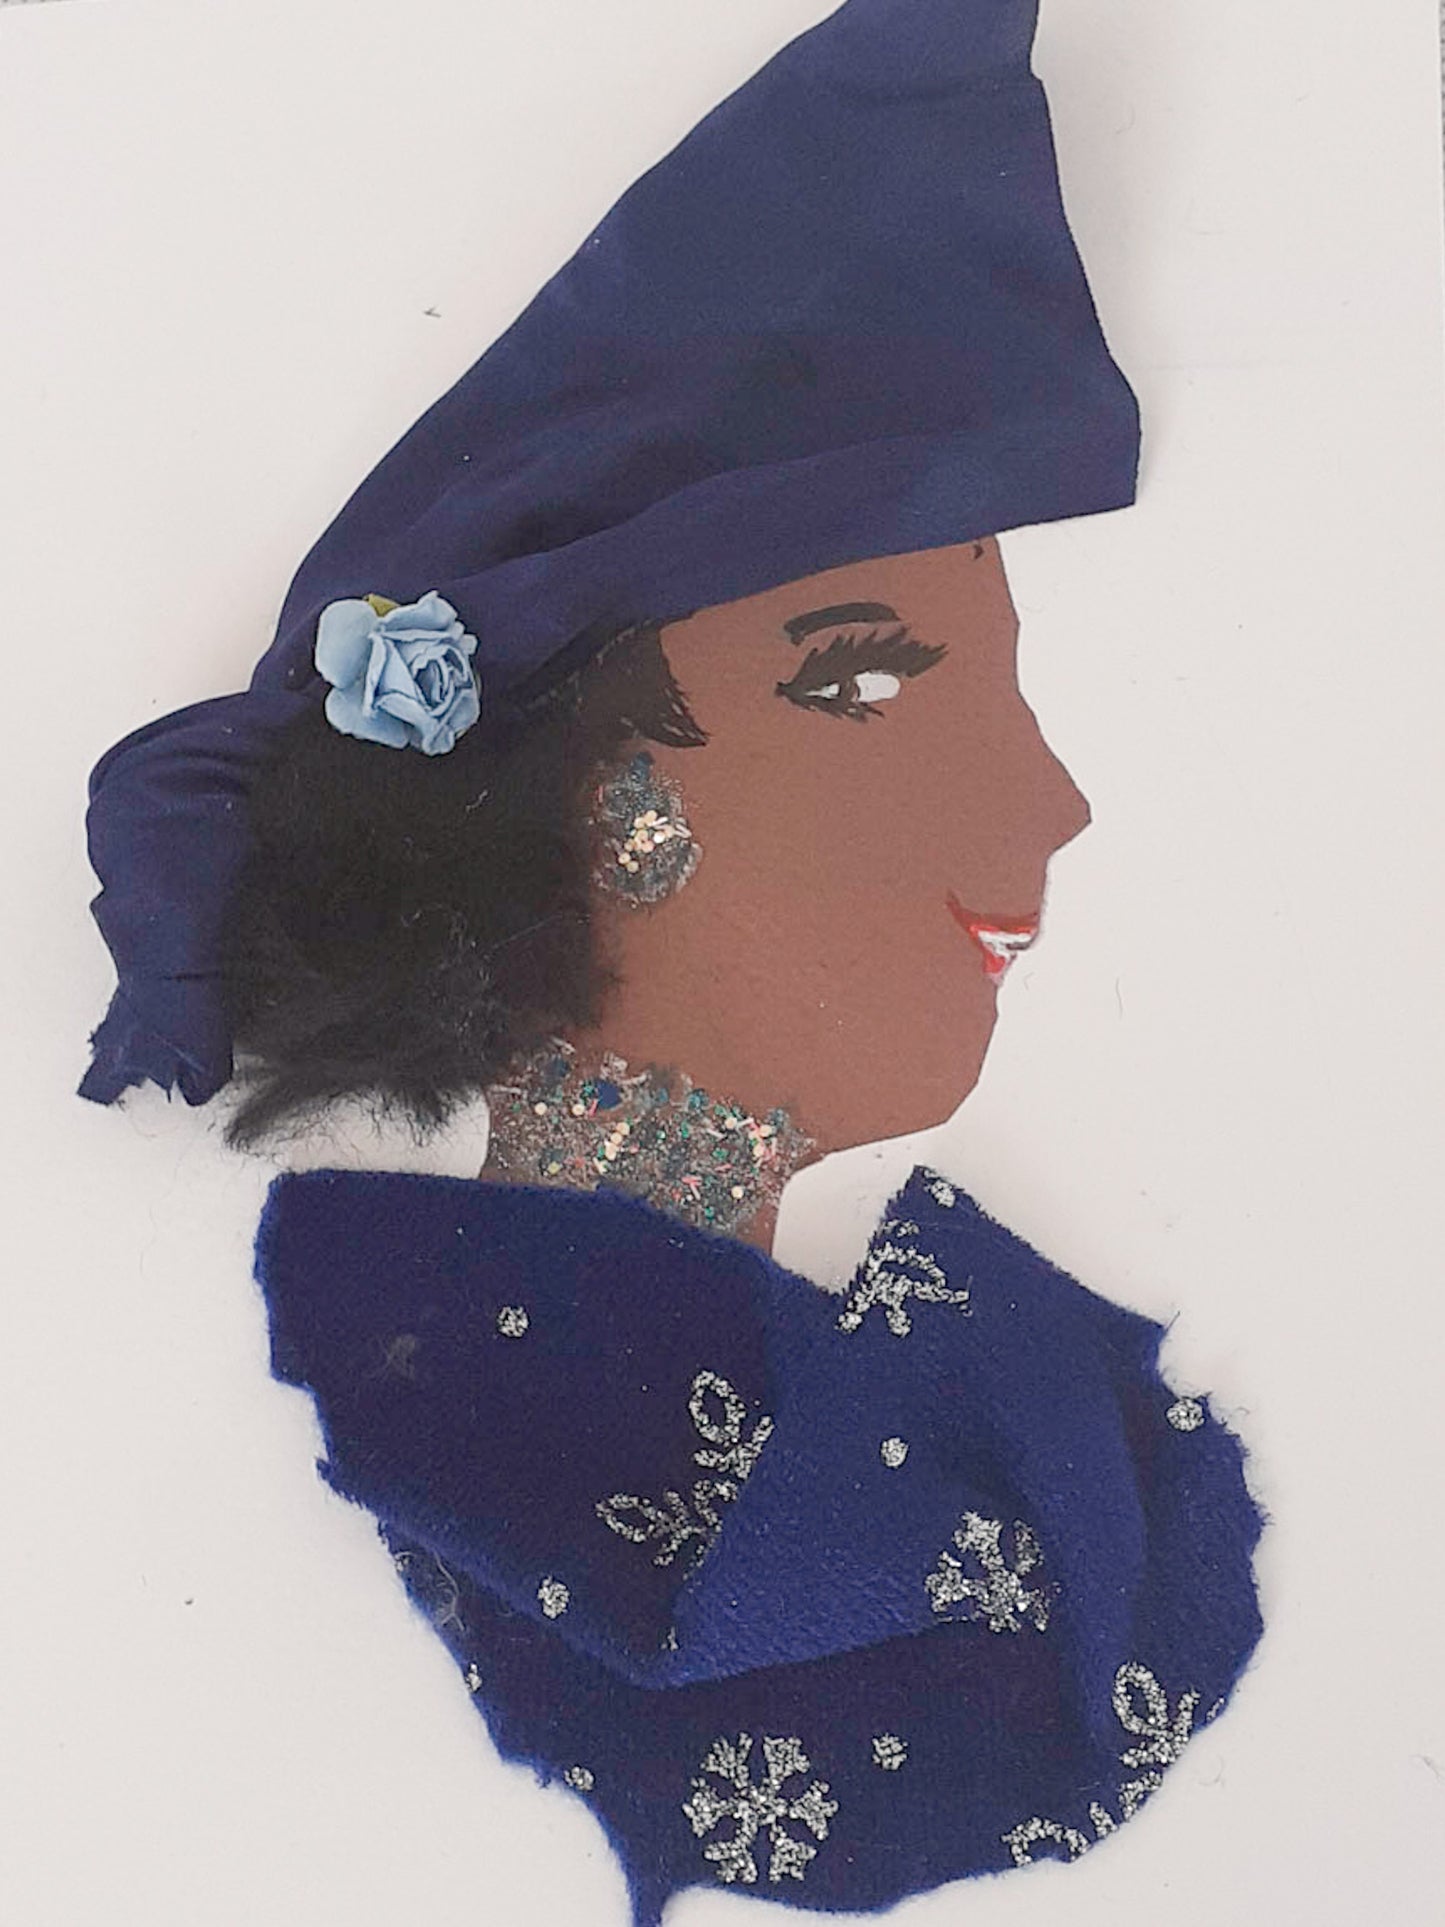 This card depicts a woman wearing a blue dress with a silver glitter snowflake pattern. She wears a matching blue headscarf with a small rose on it.